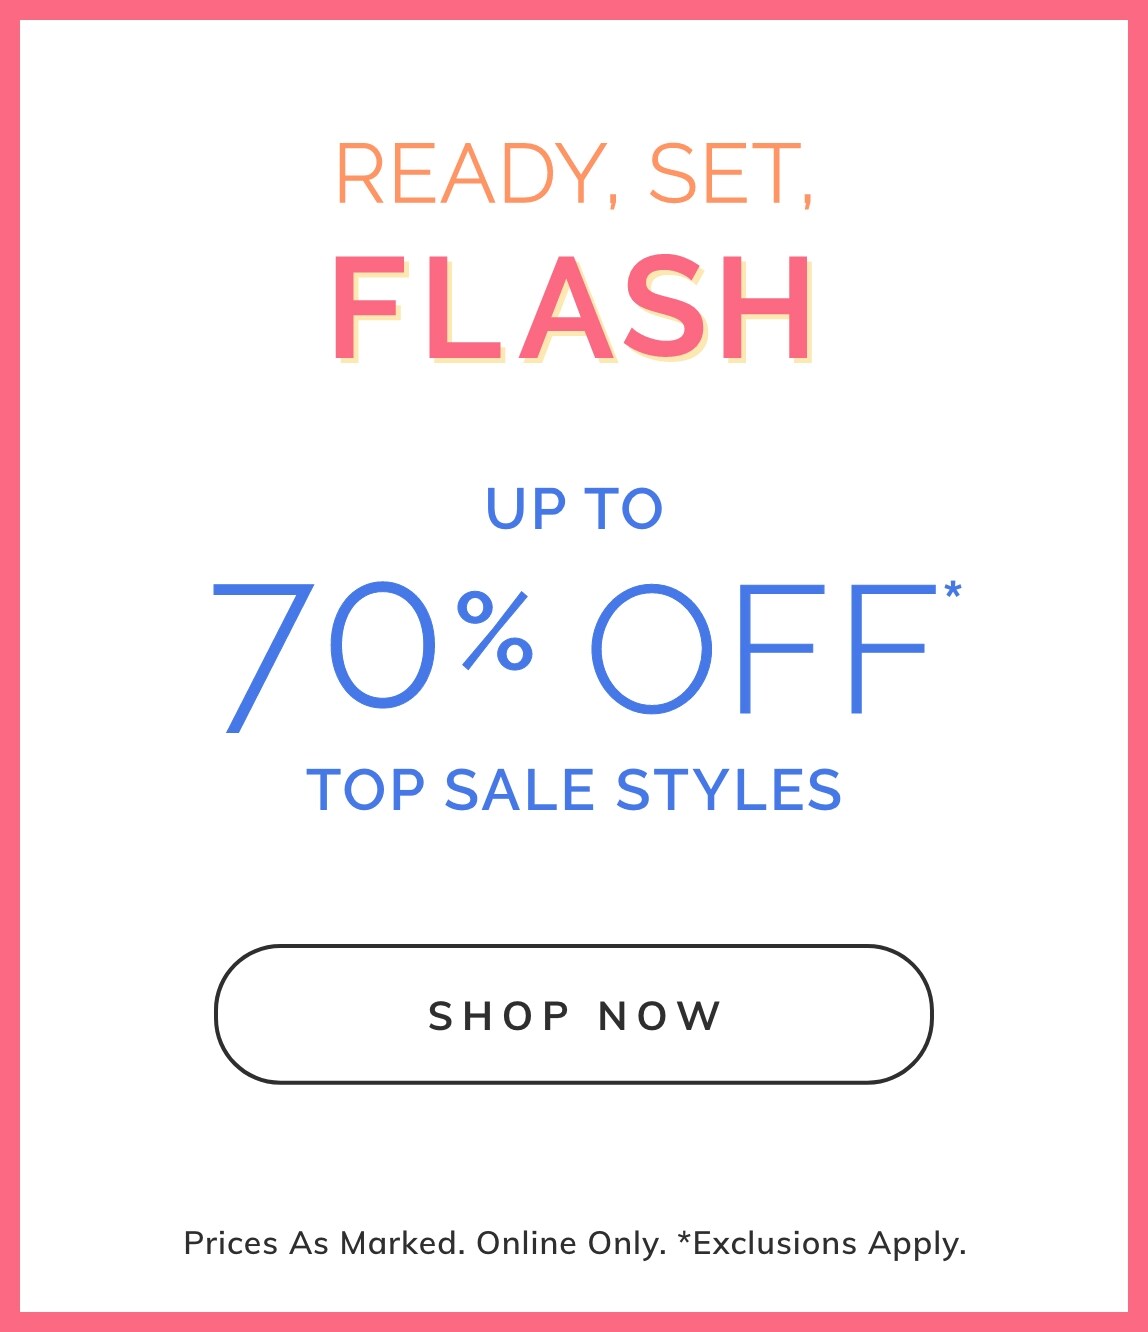 UP TO 70% OFF* TOP SALE STYLES